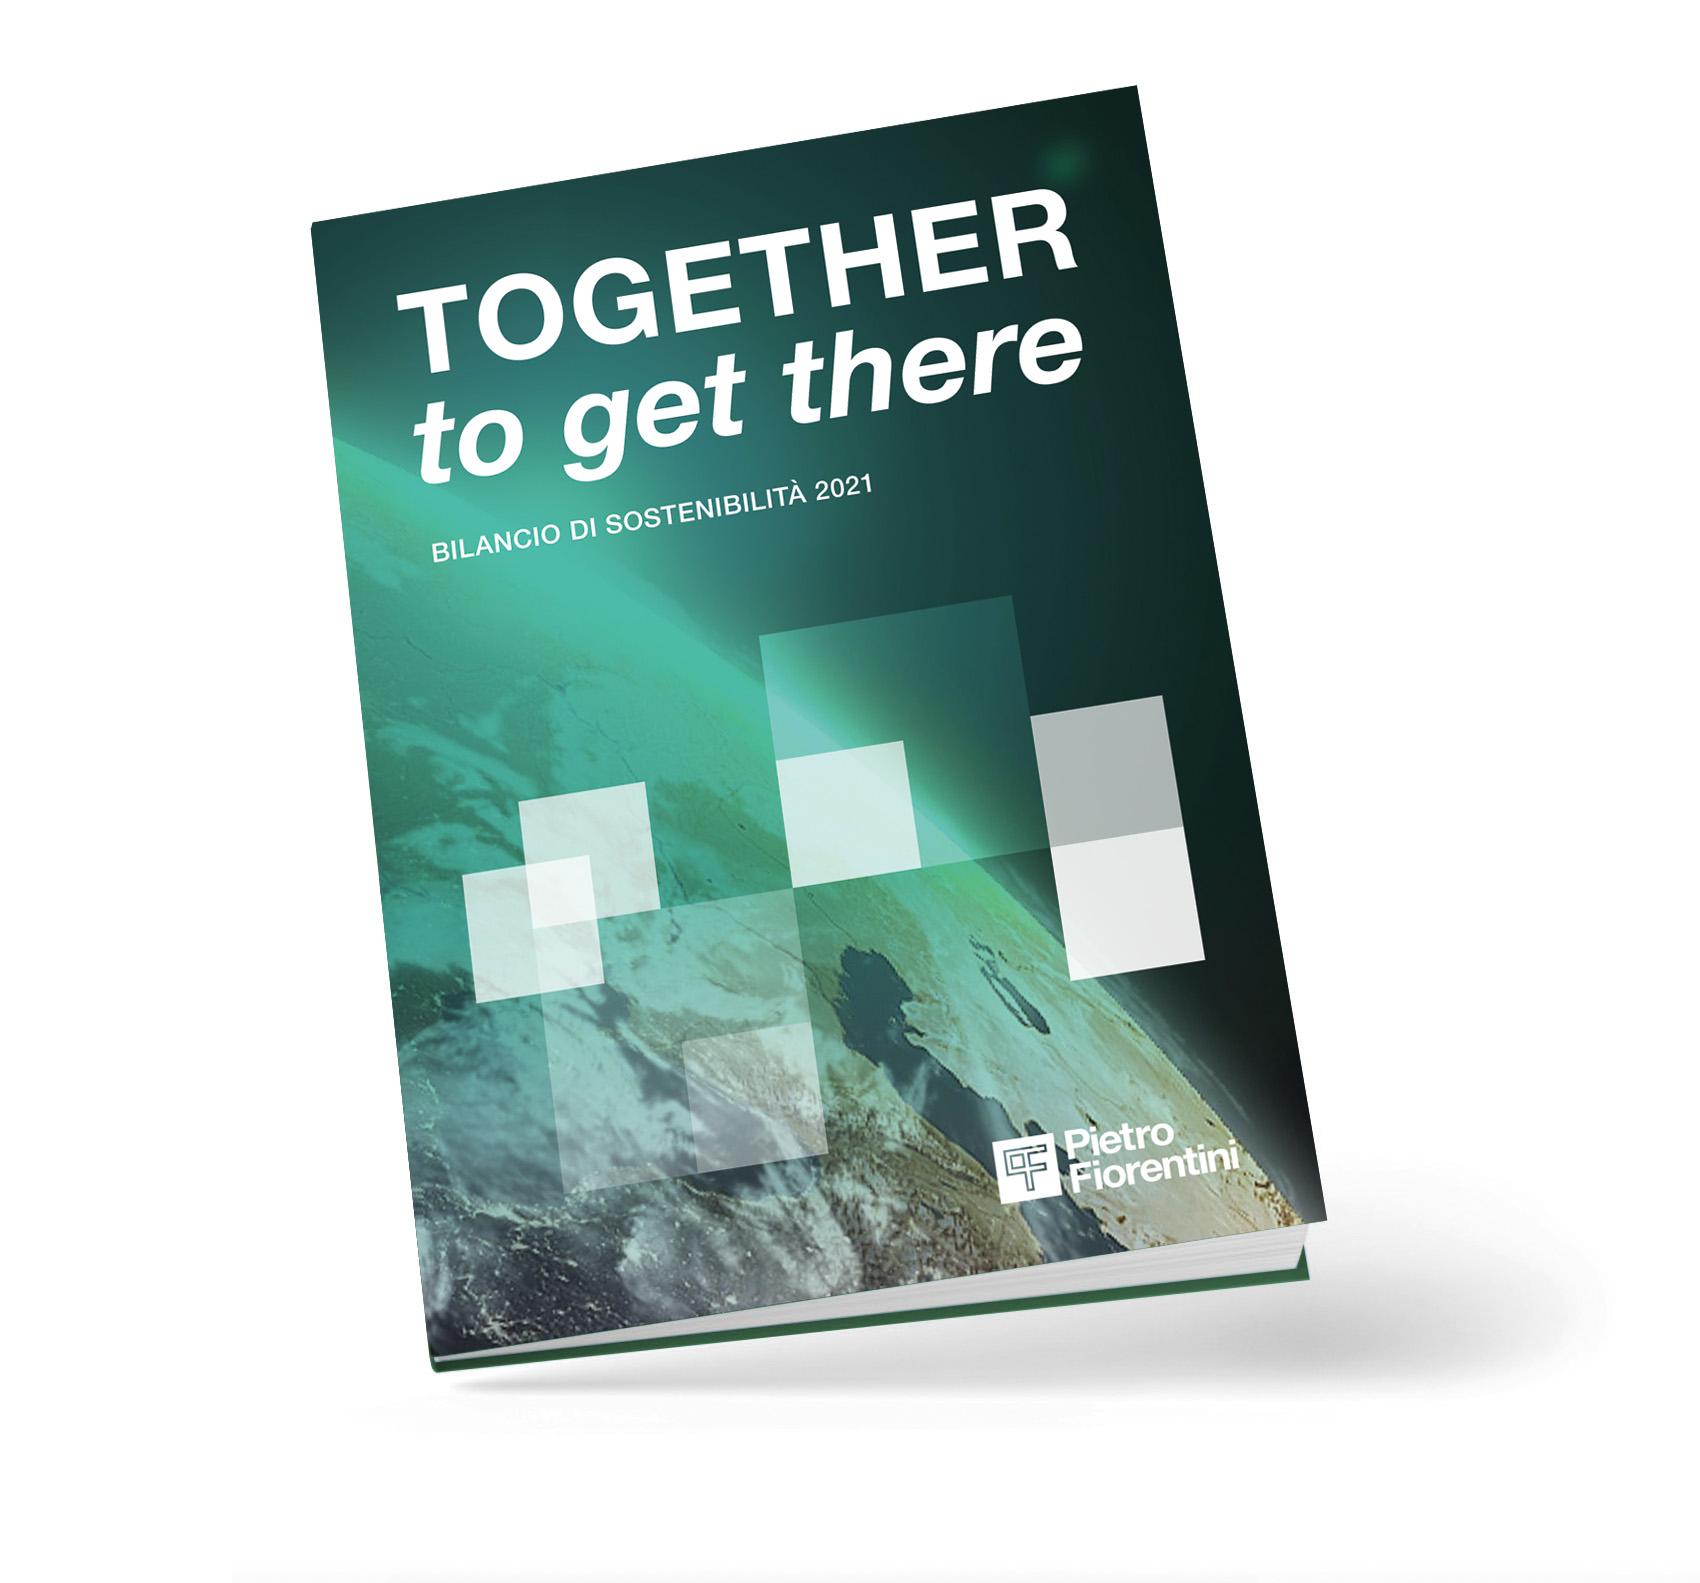 Together to get there. Pietro Fiorentini 2021 sustainability report is online